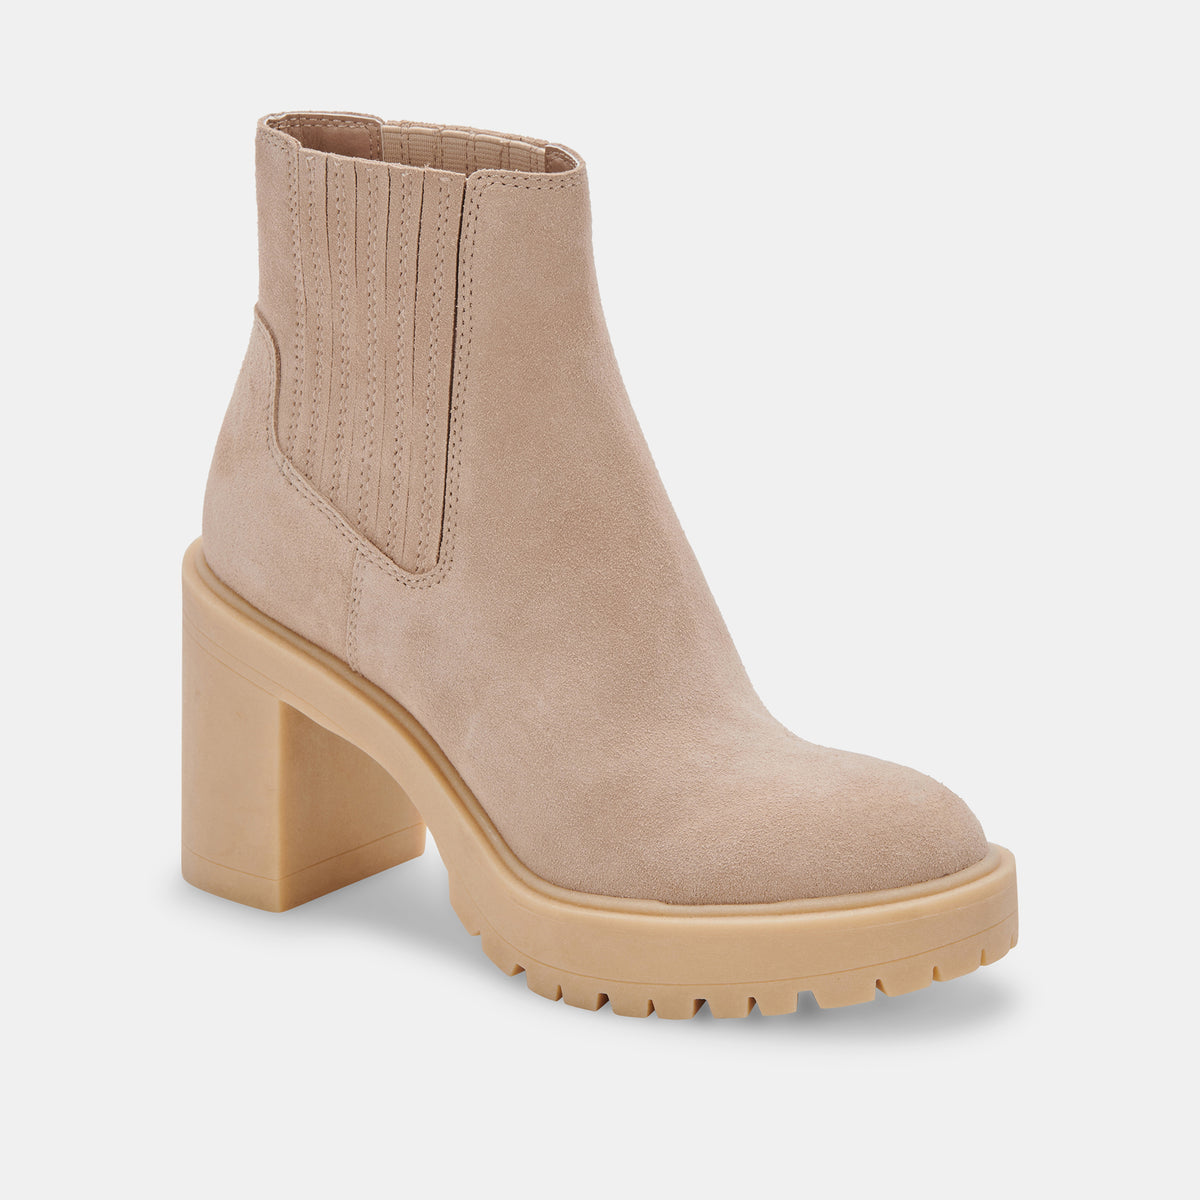 CASTER H2O BOOTIES DUNE SUEDE – Dolce Vita